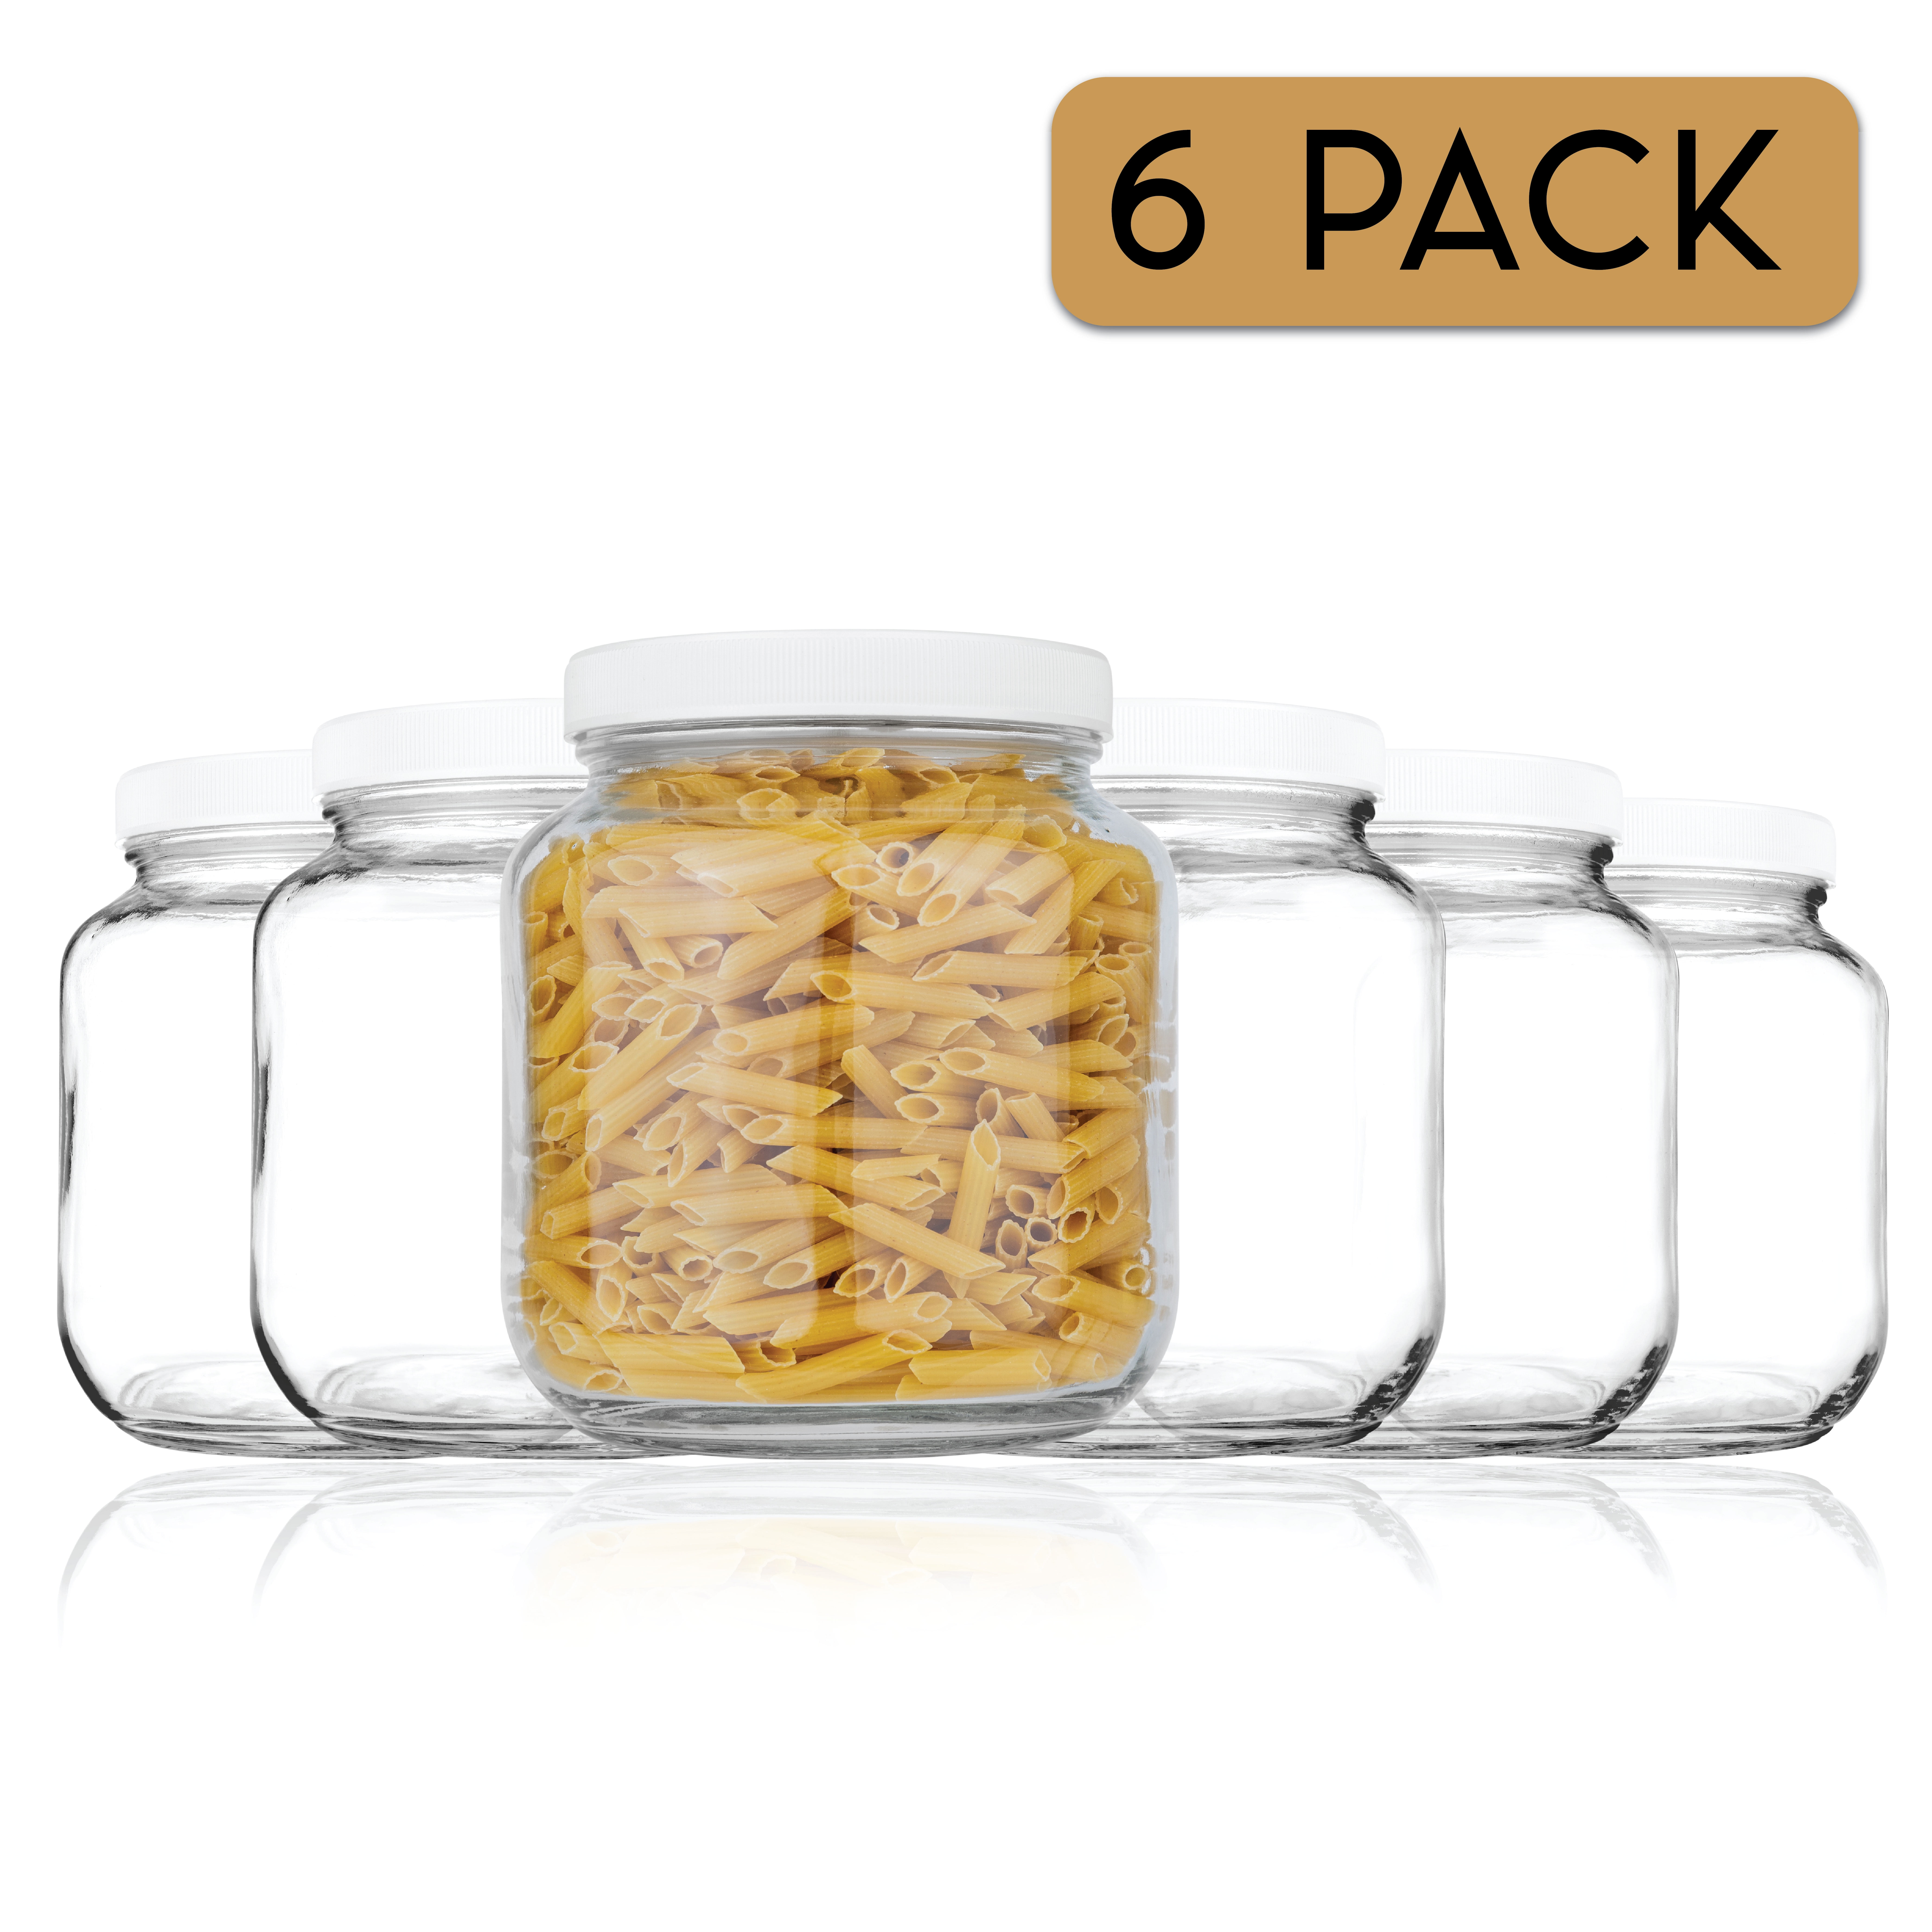 SEUNMUK 24 Pack 8oz Clear Round Plastic Jars with Lid, 250ml Wide Mouth Plastic Container, Empty Sample Storage Pot Jars for Slime, Food, Spices